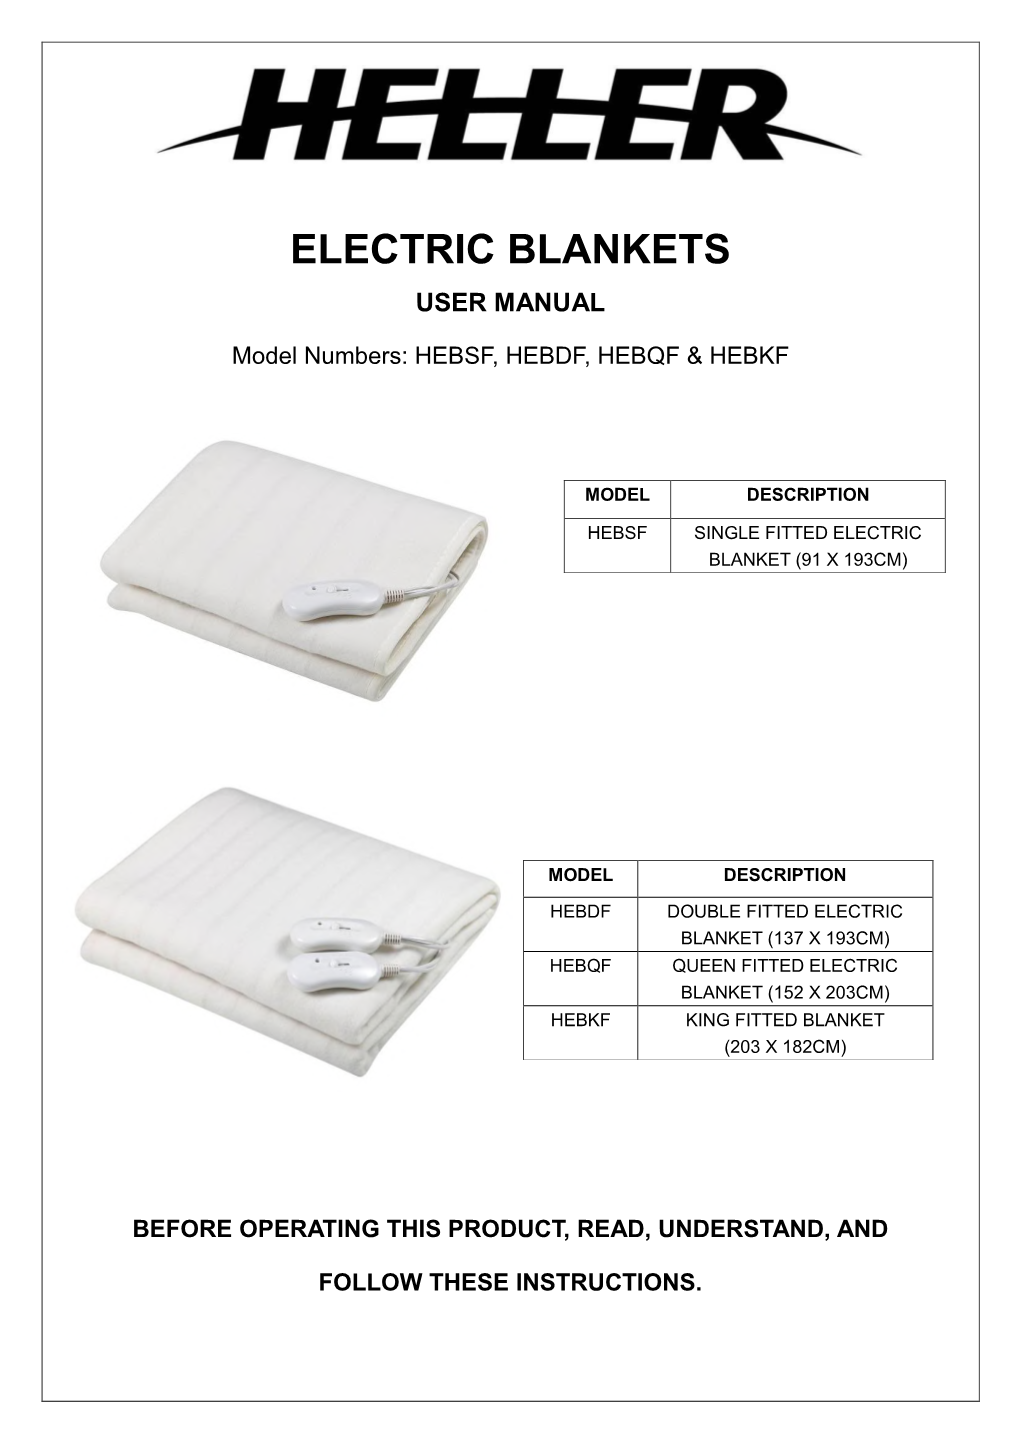 Electric Blankets User Manual